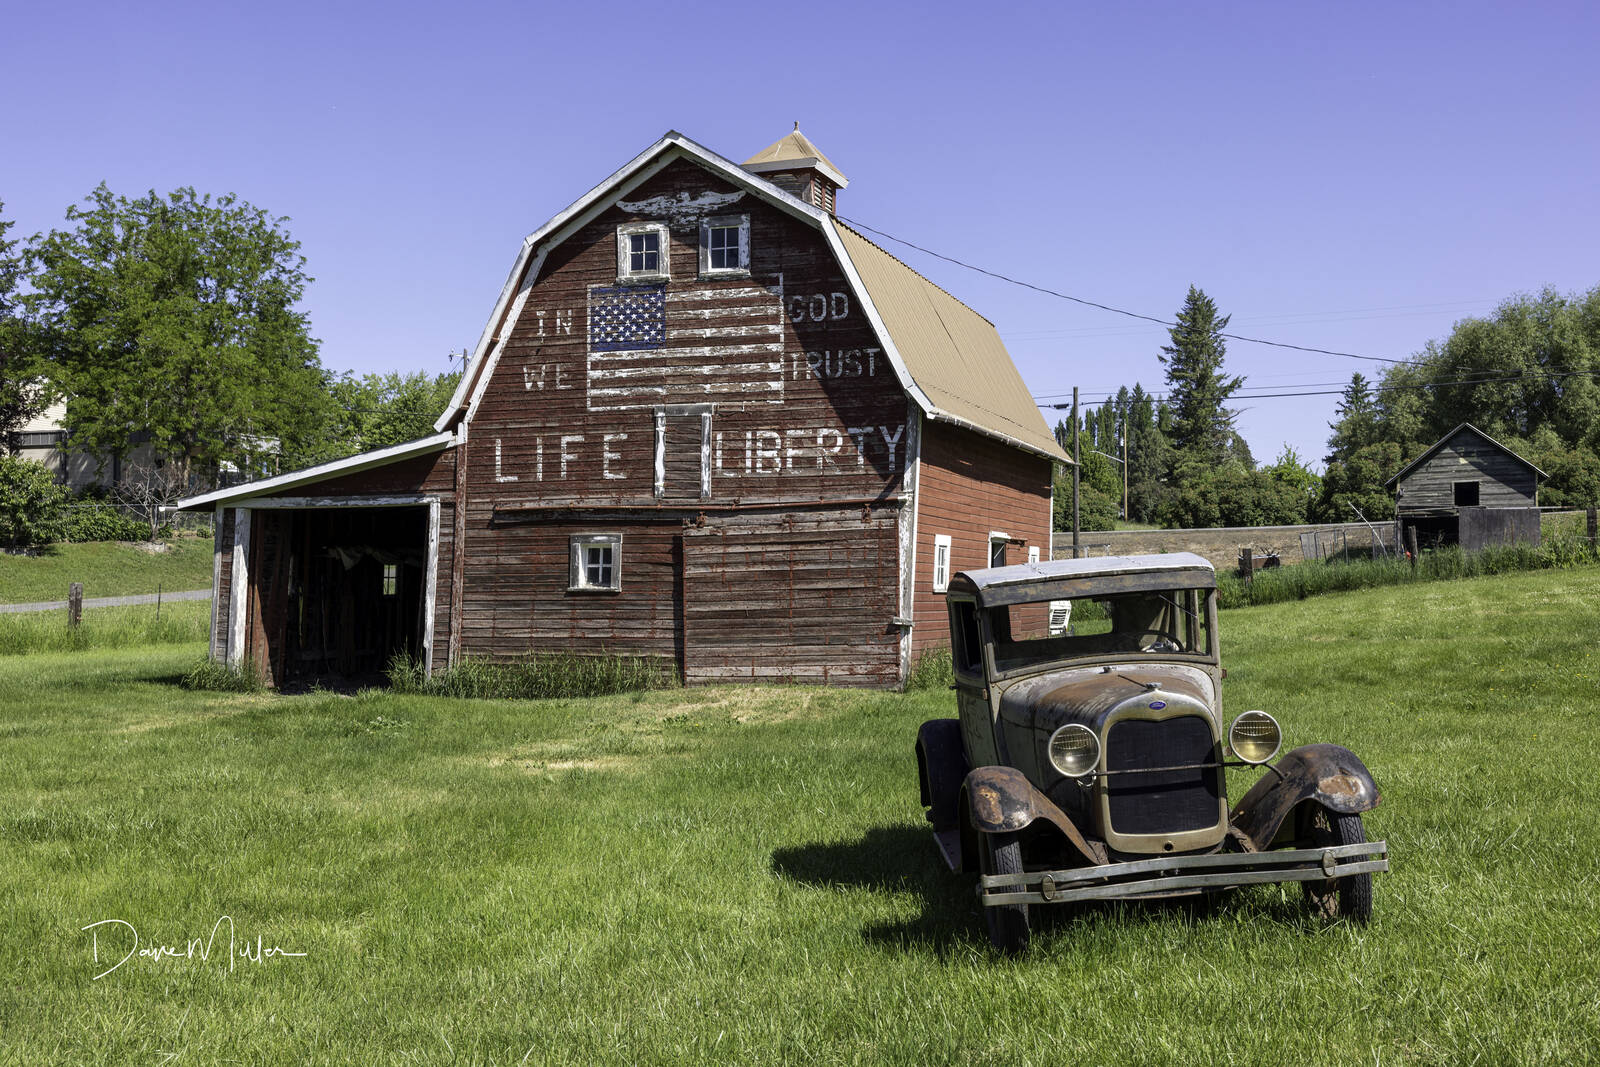 Image of In God We Trust Barn by Dave Miller